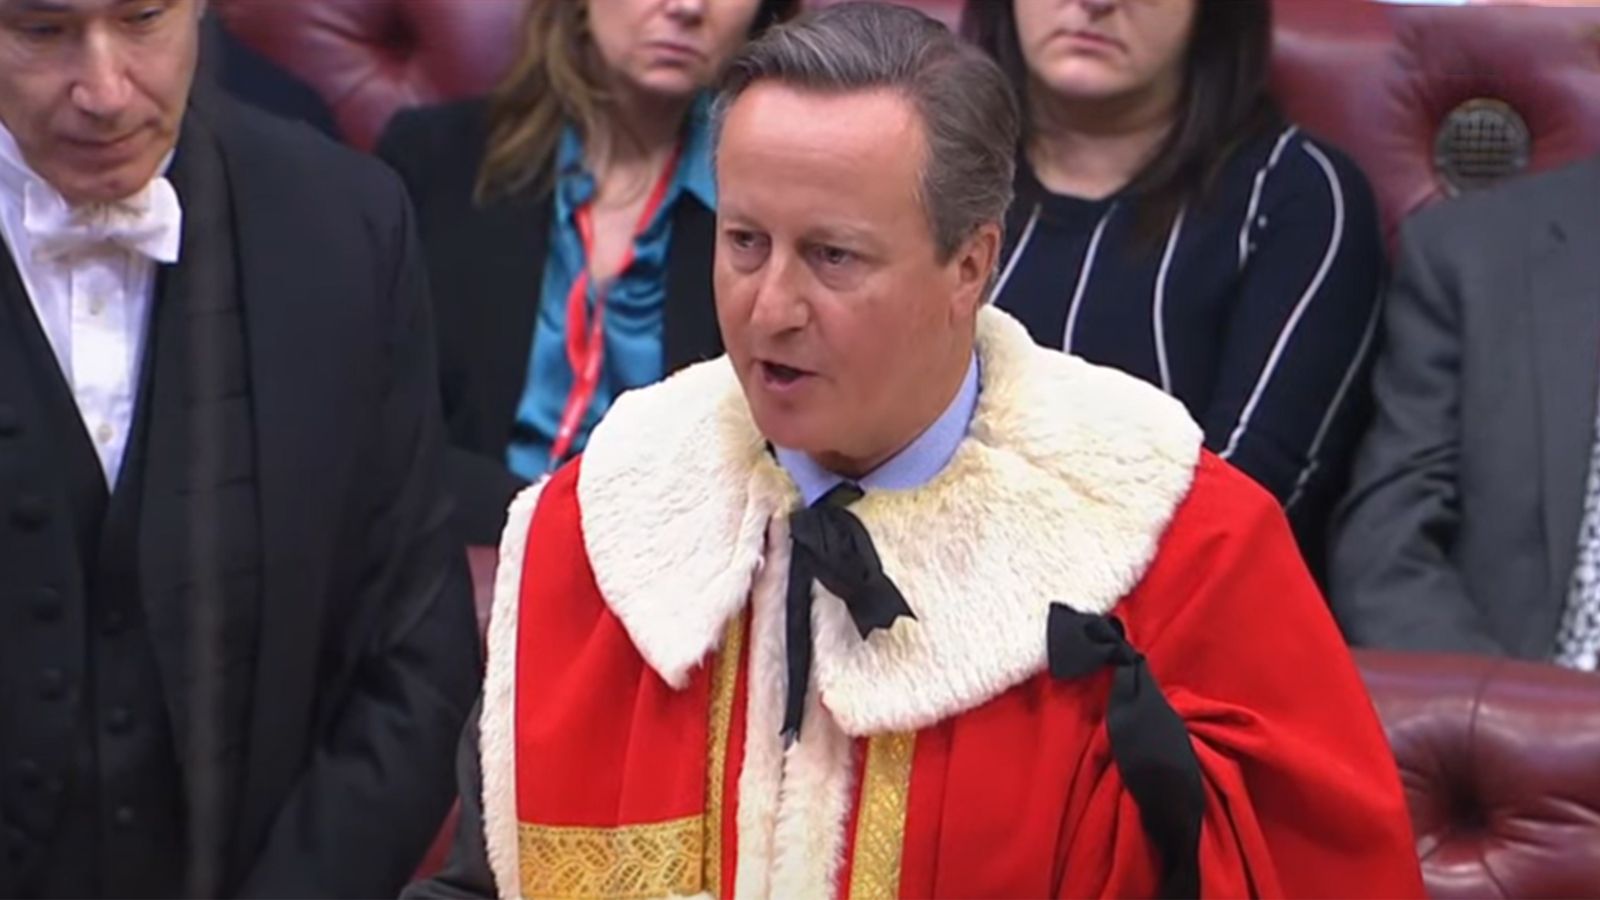 David Cameron enters House of Lords - and officially takes up new title